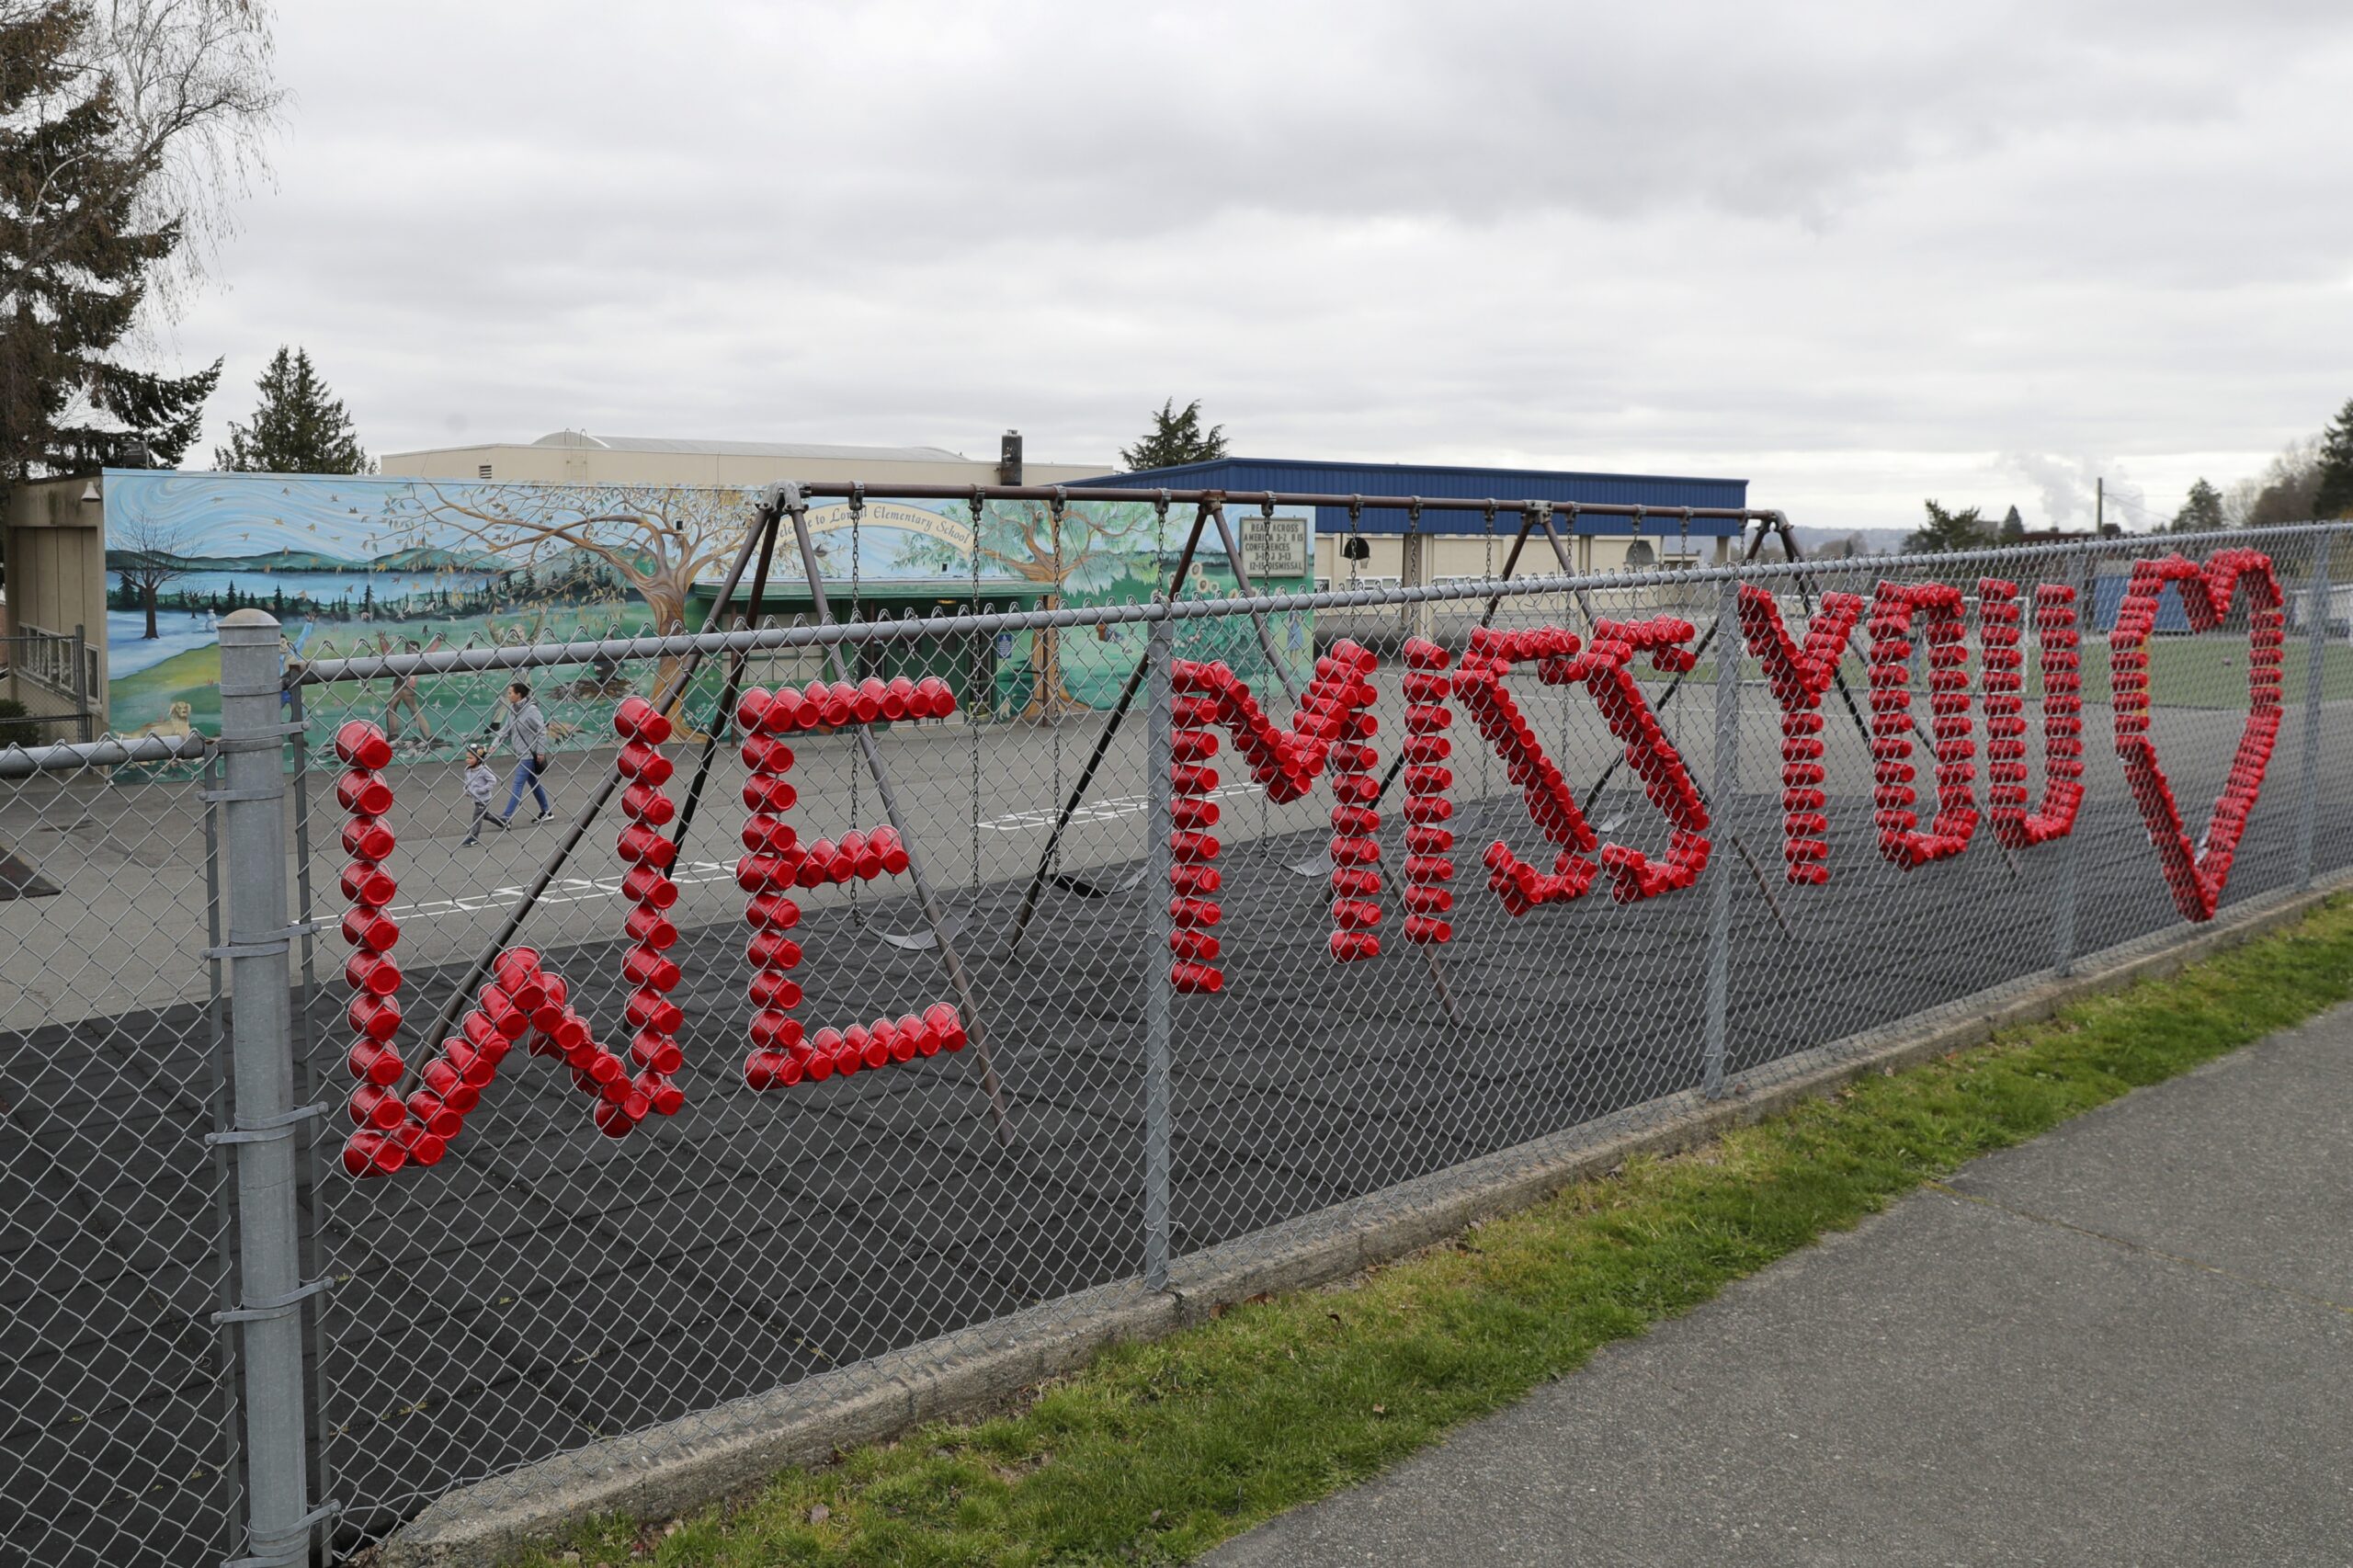 A sign reads "We Miss You" at Lowell Elementary School in Tacoma, Wash.